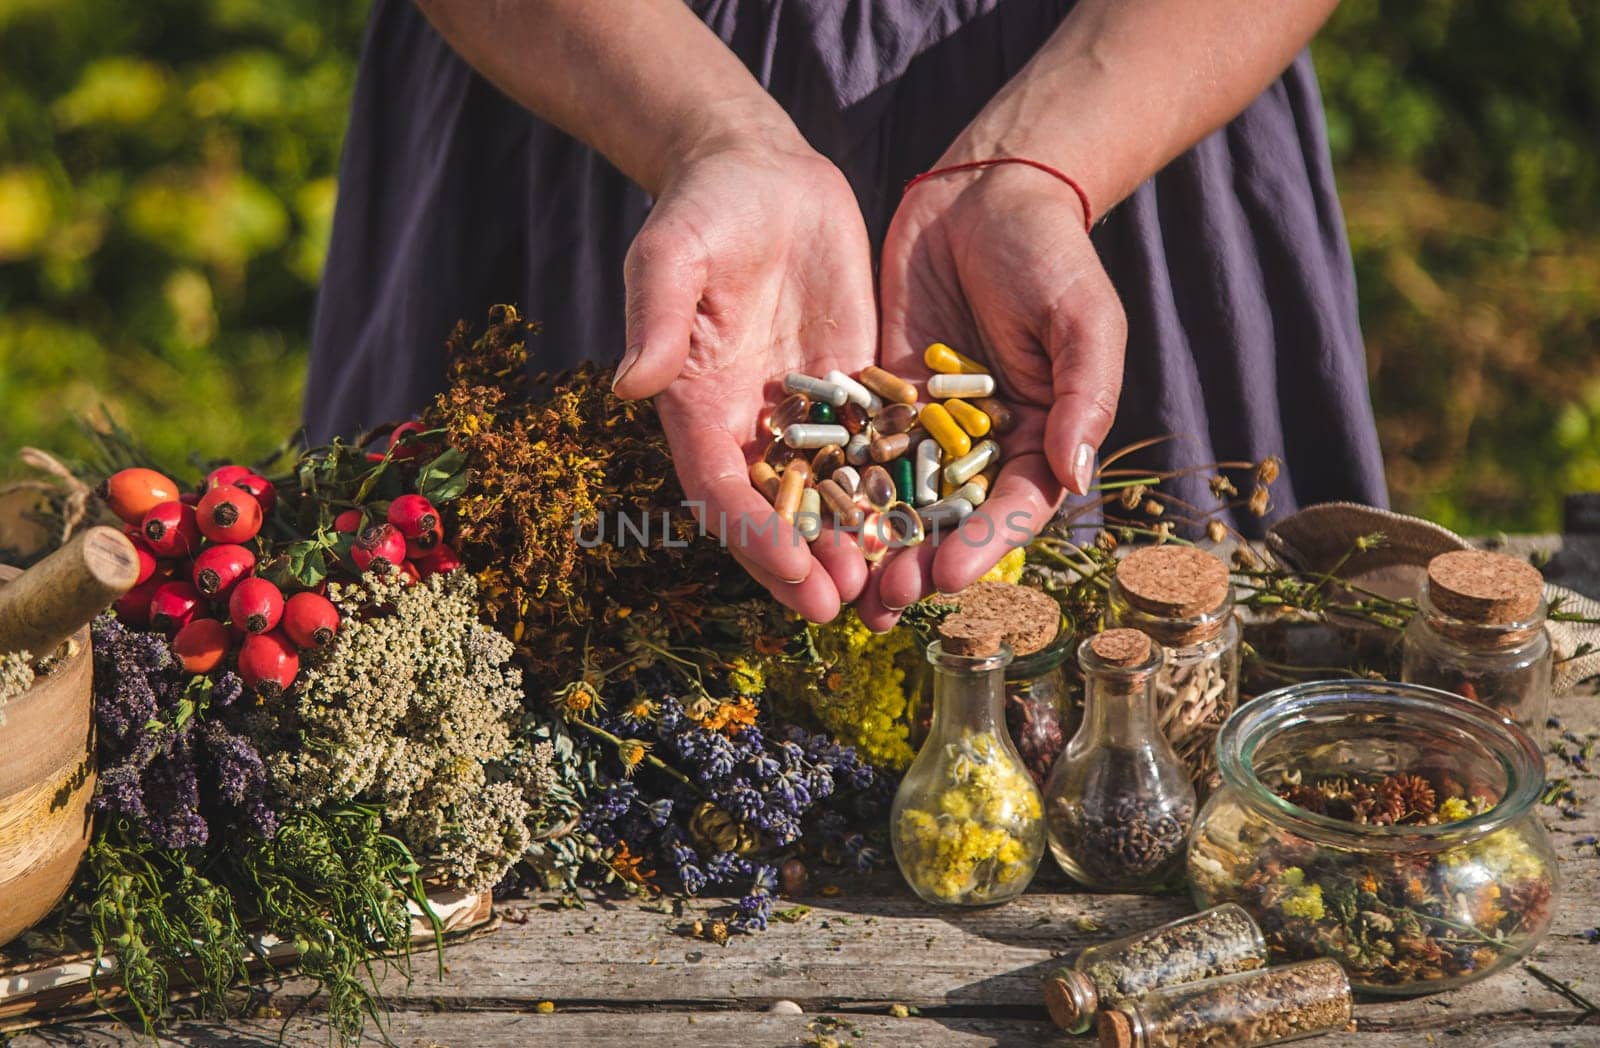 In the hands of herbs and supplements. Selective focus. by yanadjana